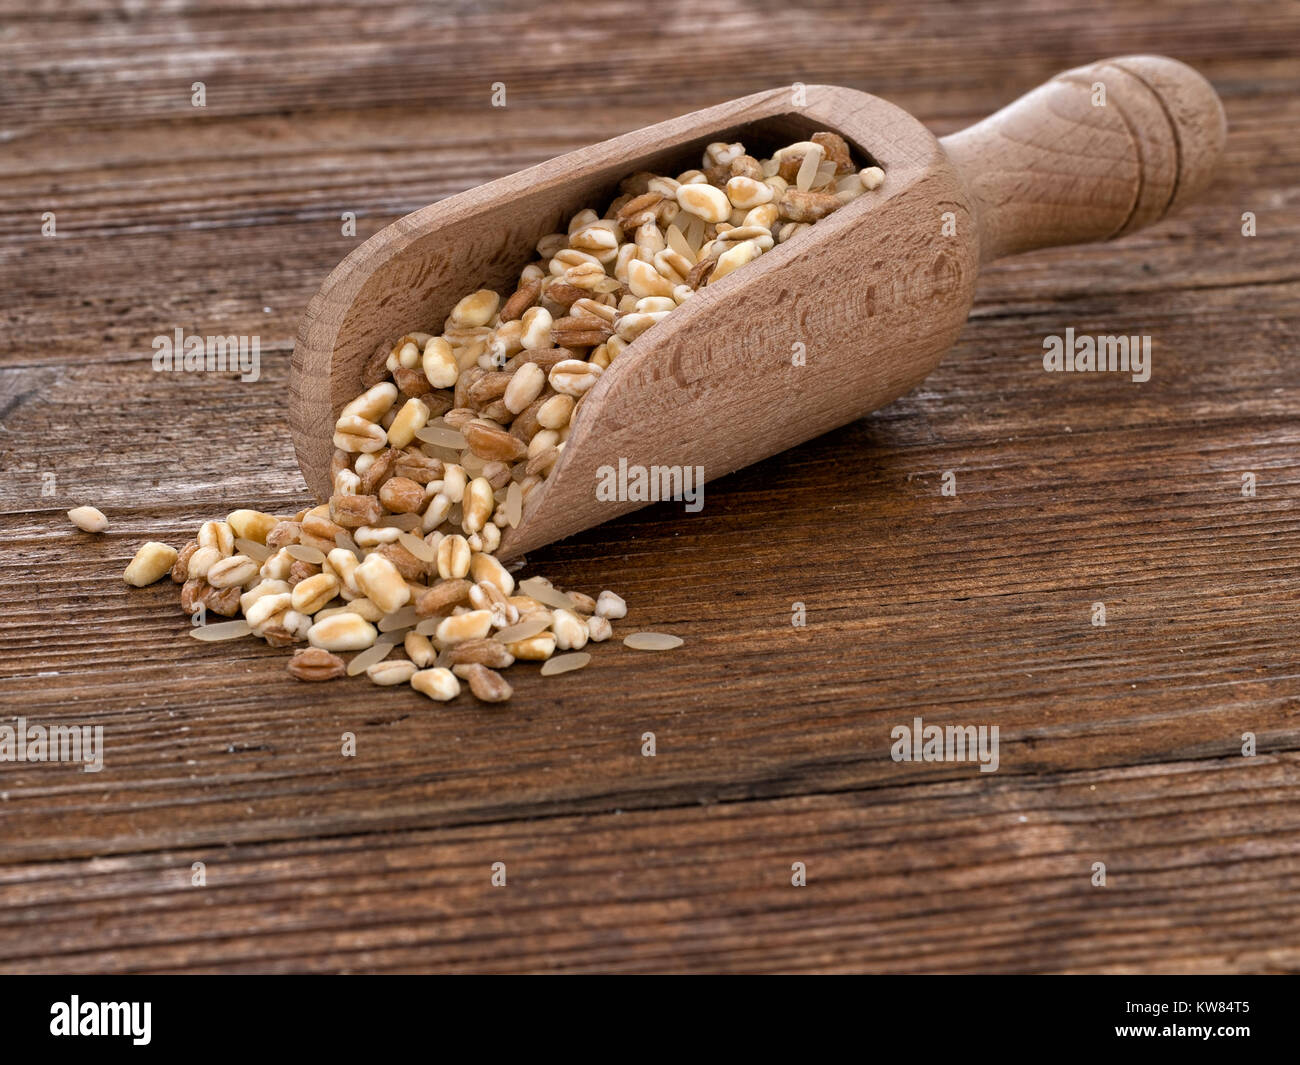 Healthy food option. Multigrain. With wooden scoop. Spelt, barley, oats and rice. Stock Photo